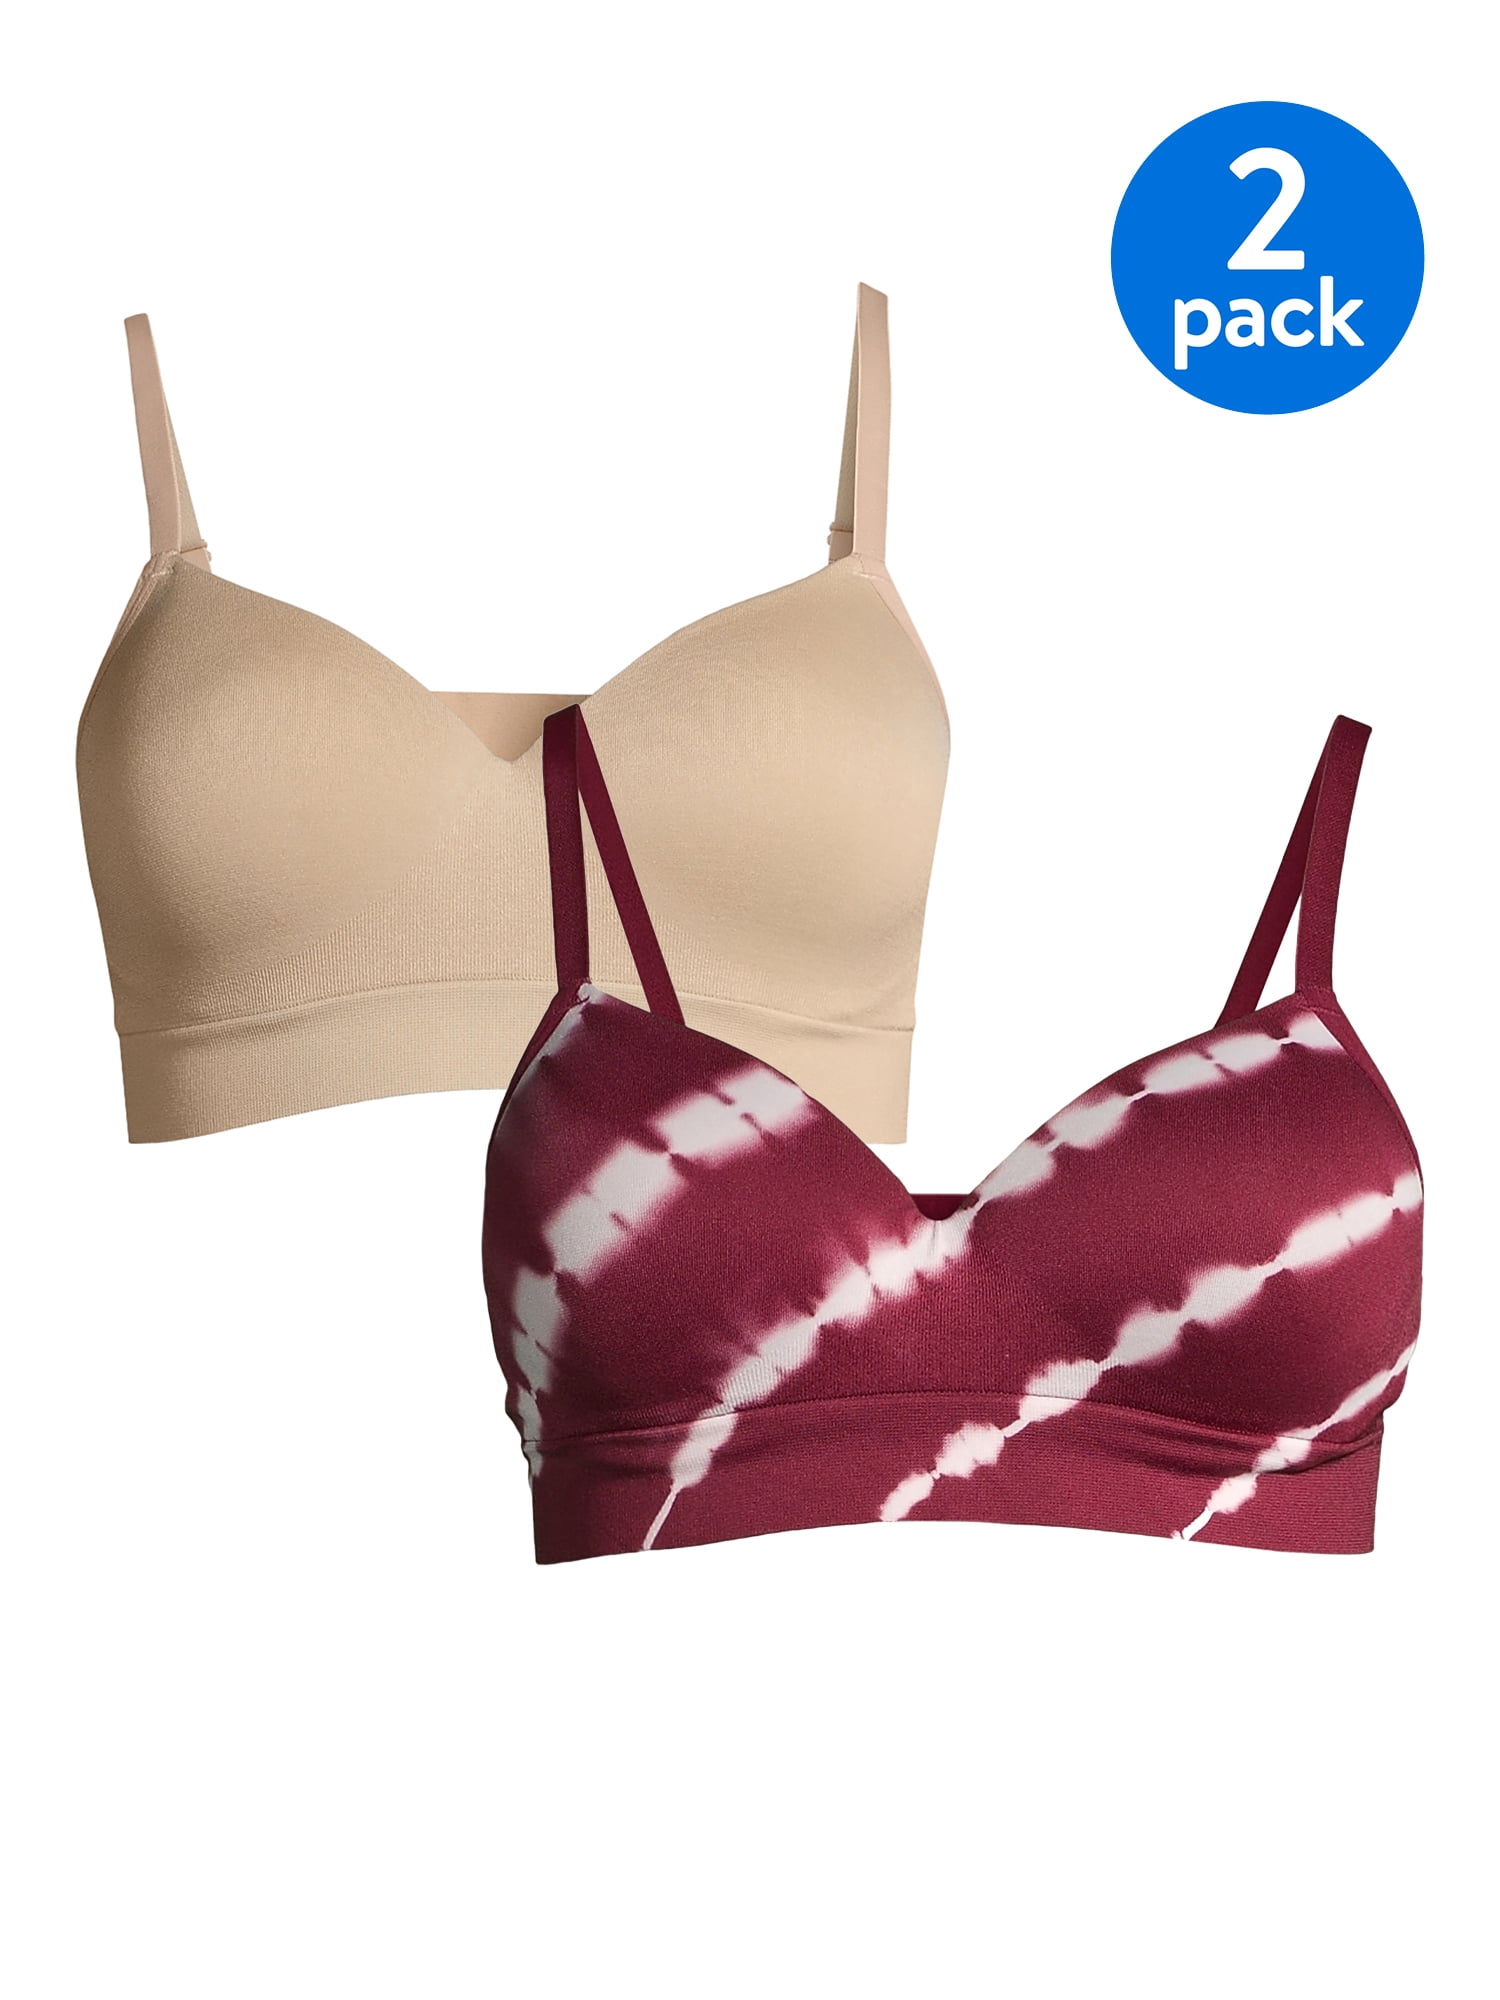 Shop Pack of 2 - Plain Non-Padded Non-Wired Comfort Bra Online